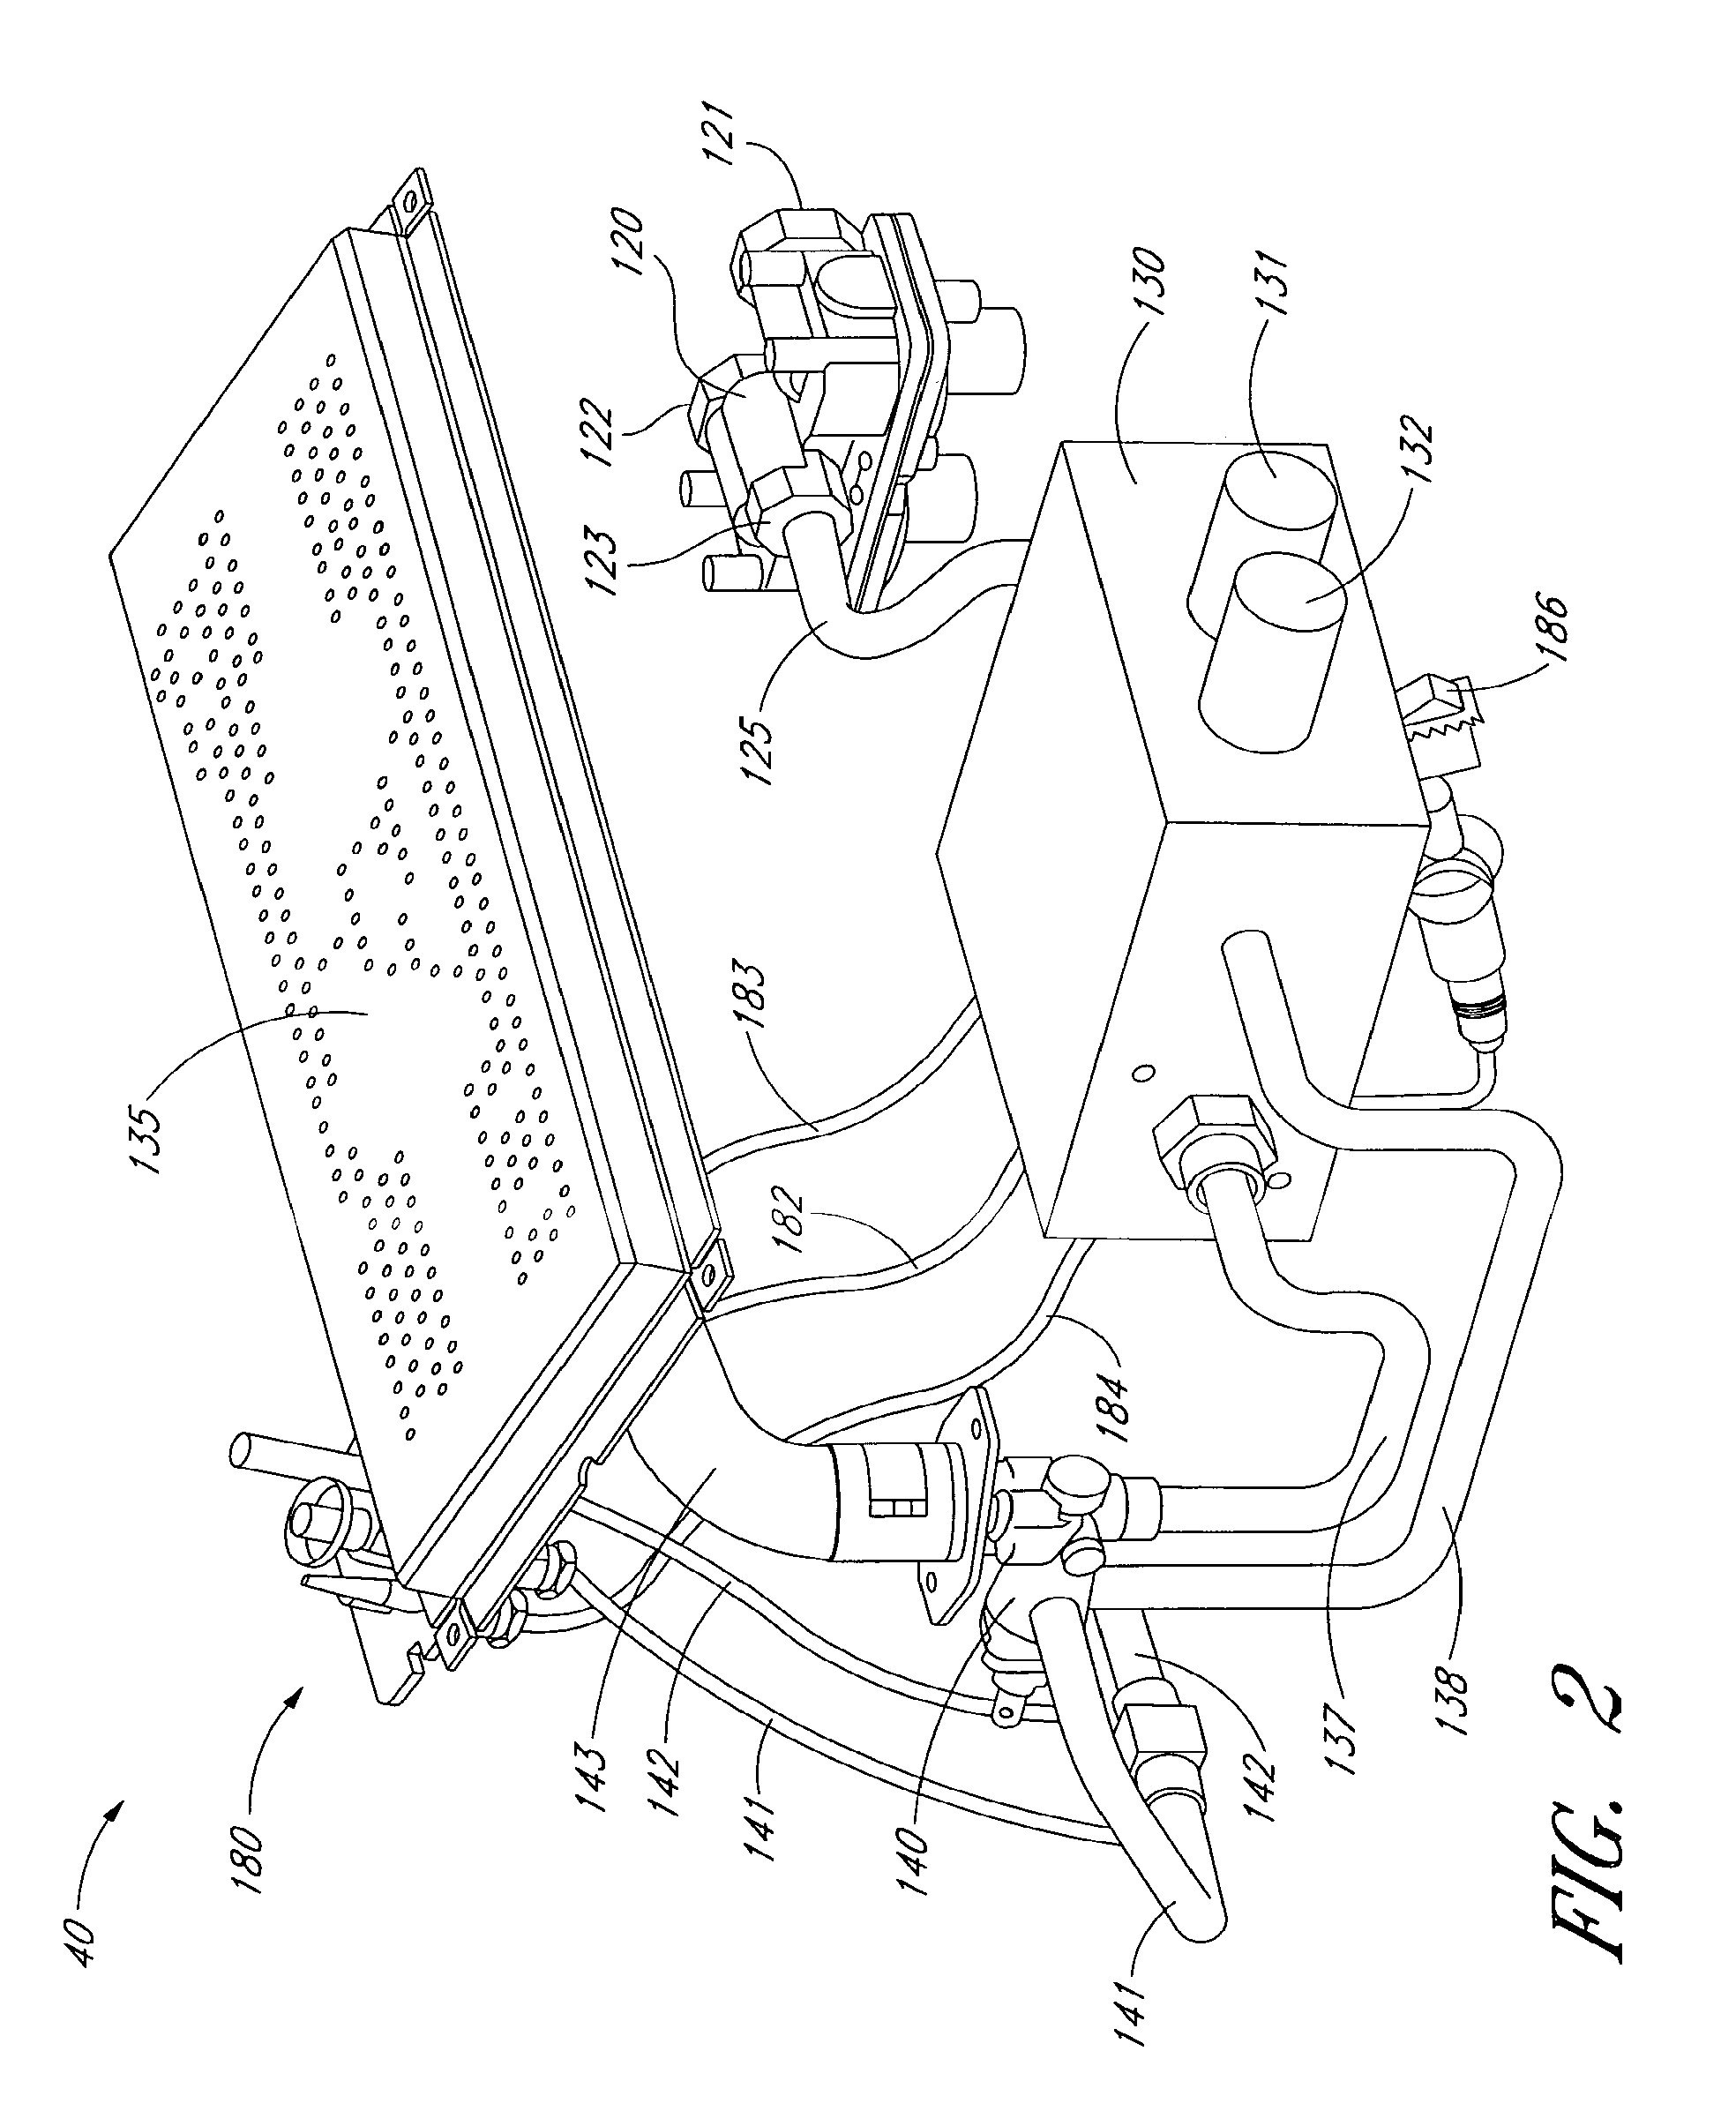 Pilot assemblies for heating devices